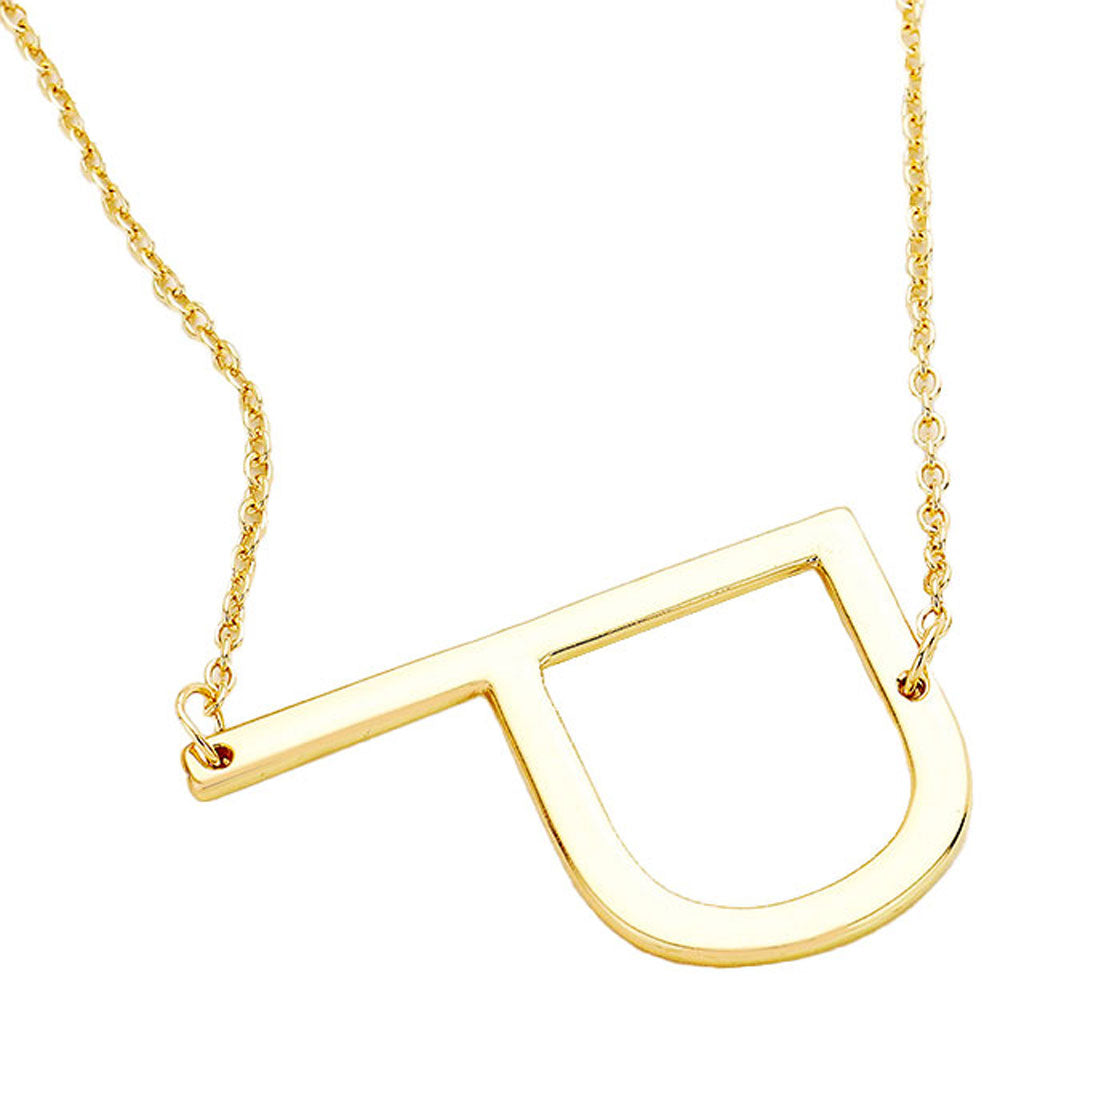 Gold Monogram Metal Pendant Necklace. Beautifully crafted design adds a gorgeous glow to any outfit. Jewelry that fits your lifestyle! Perfect Birthday Gift, Anniversary Gift, Mother's Day Gift, Anniversary Gift, Graduation Gift, Prom Jewelry, Just Because Gift, Thank you Gift.